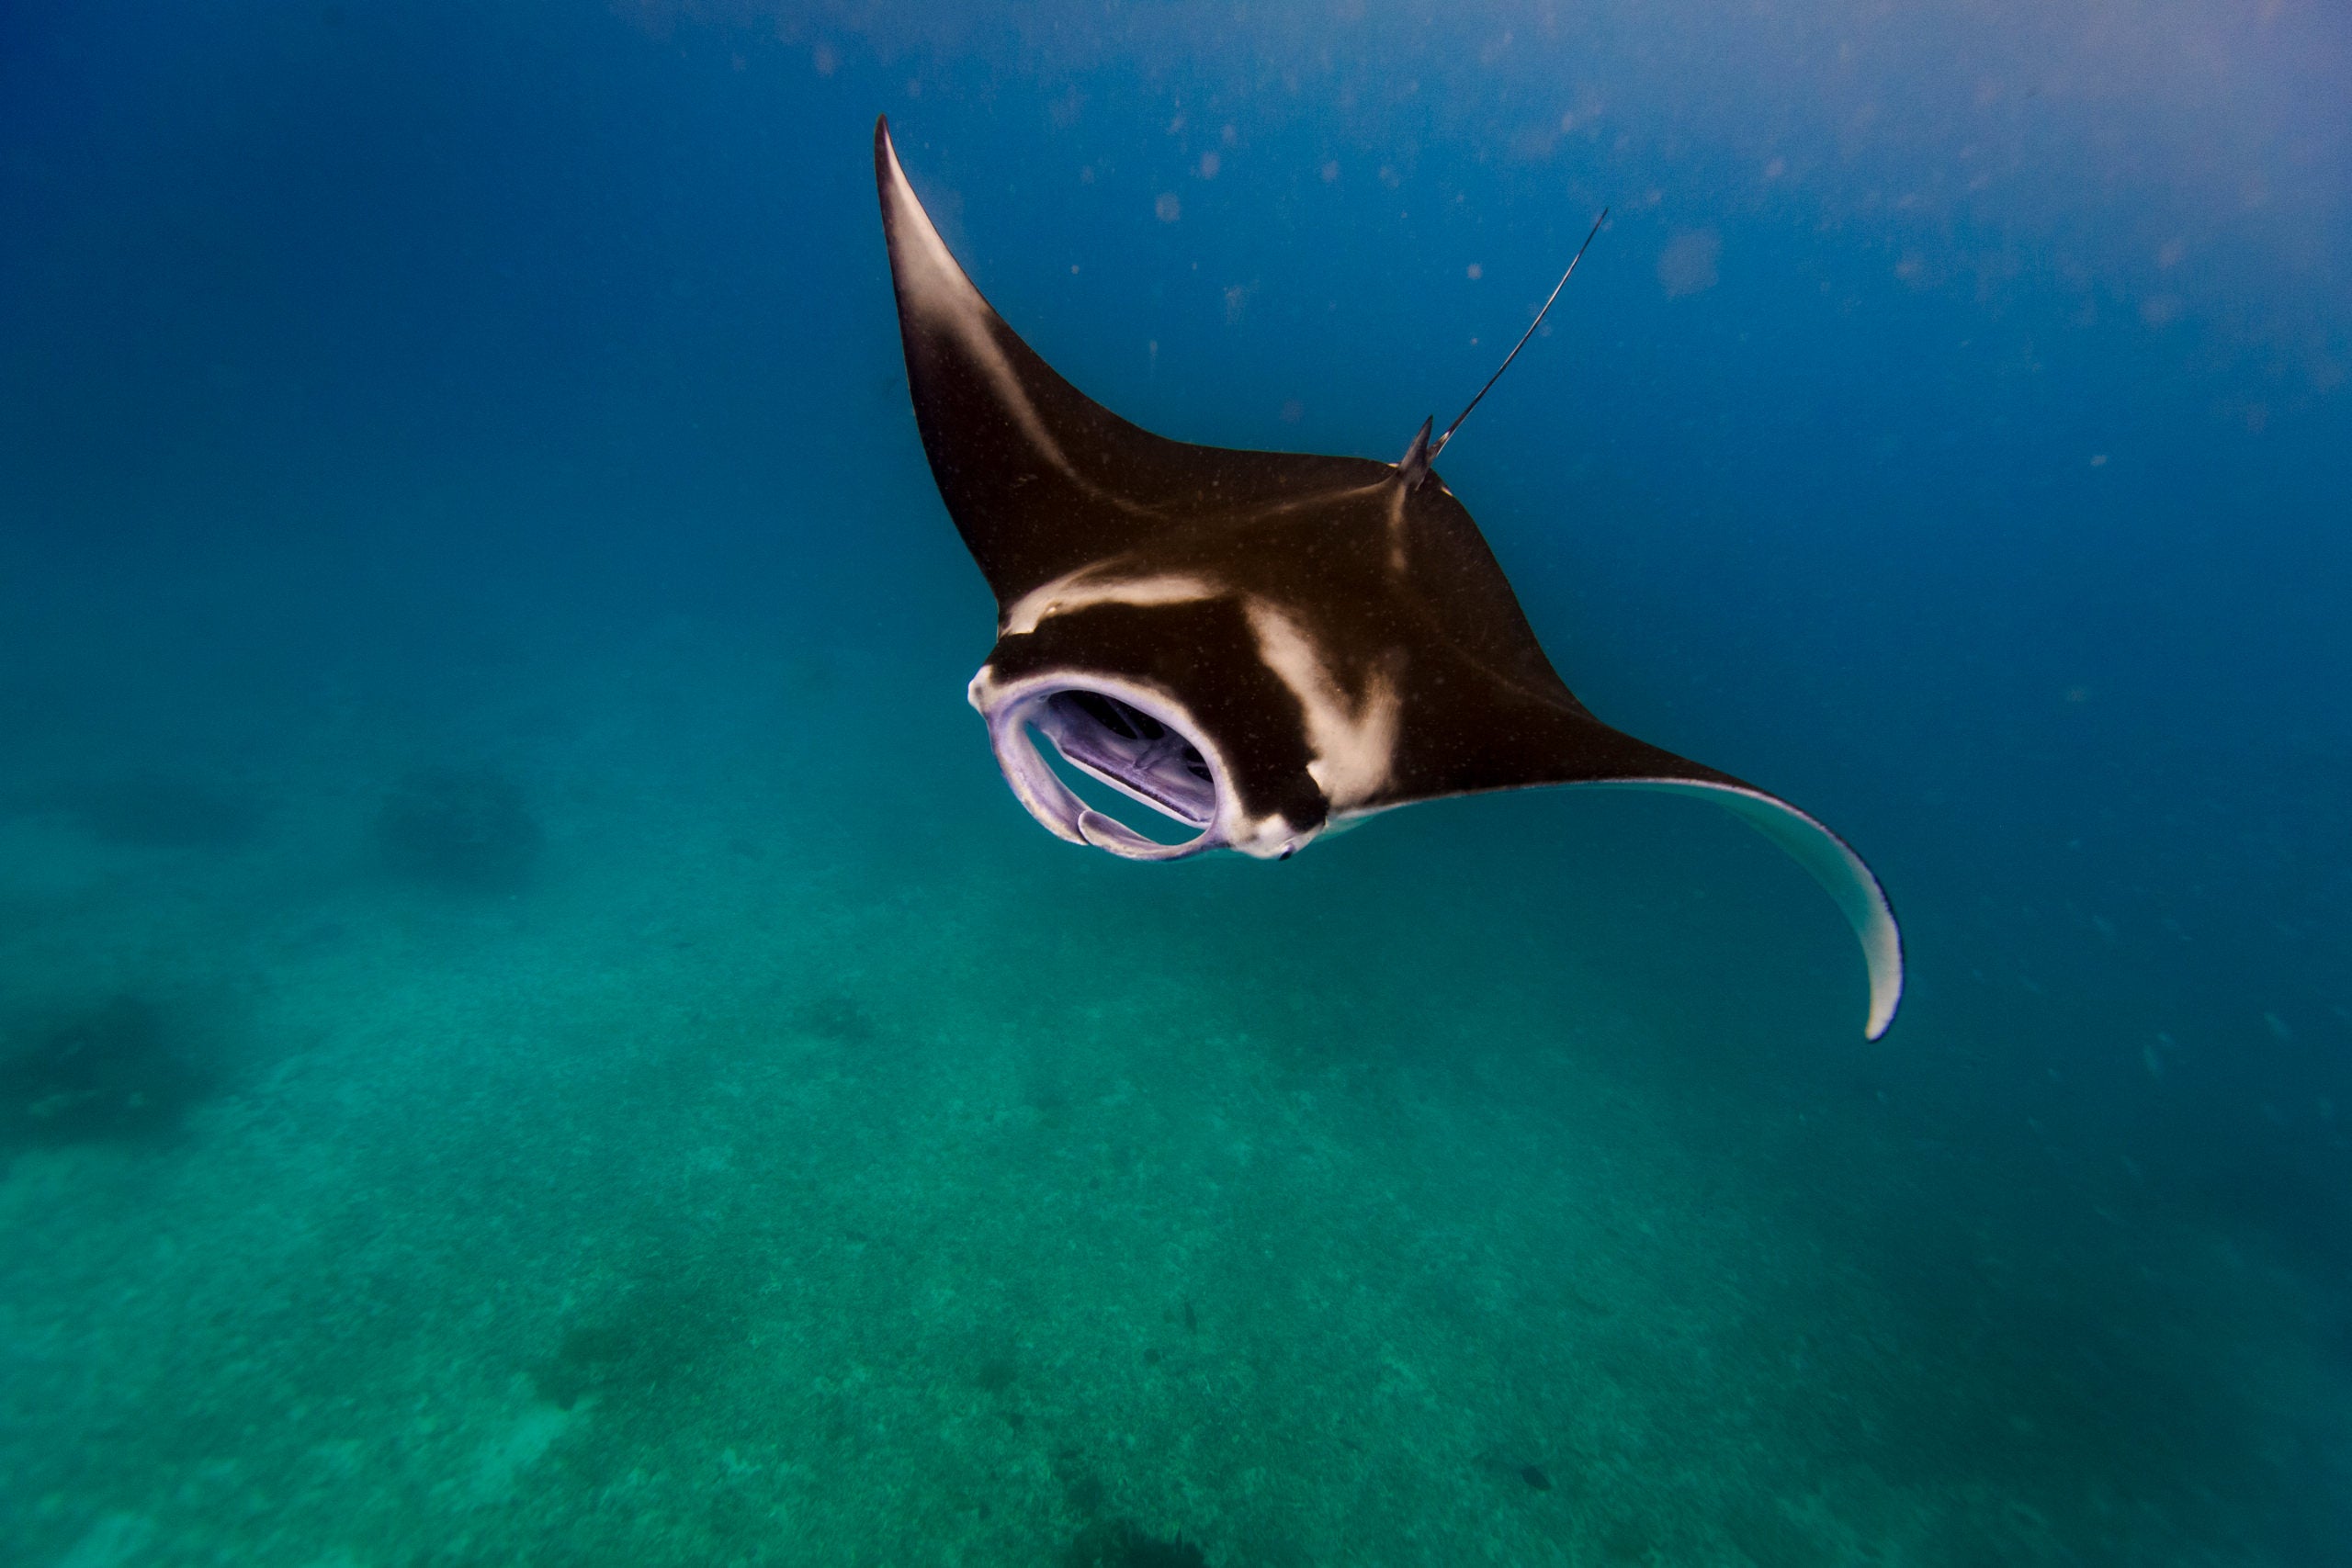 Underwater reef manta photograph by Jason Jaacks is part of a multi-year visual study of the biodiversity of the Coral Triangle region of the south Pacific.